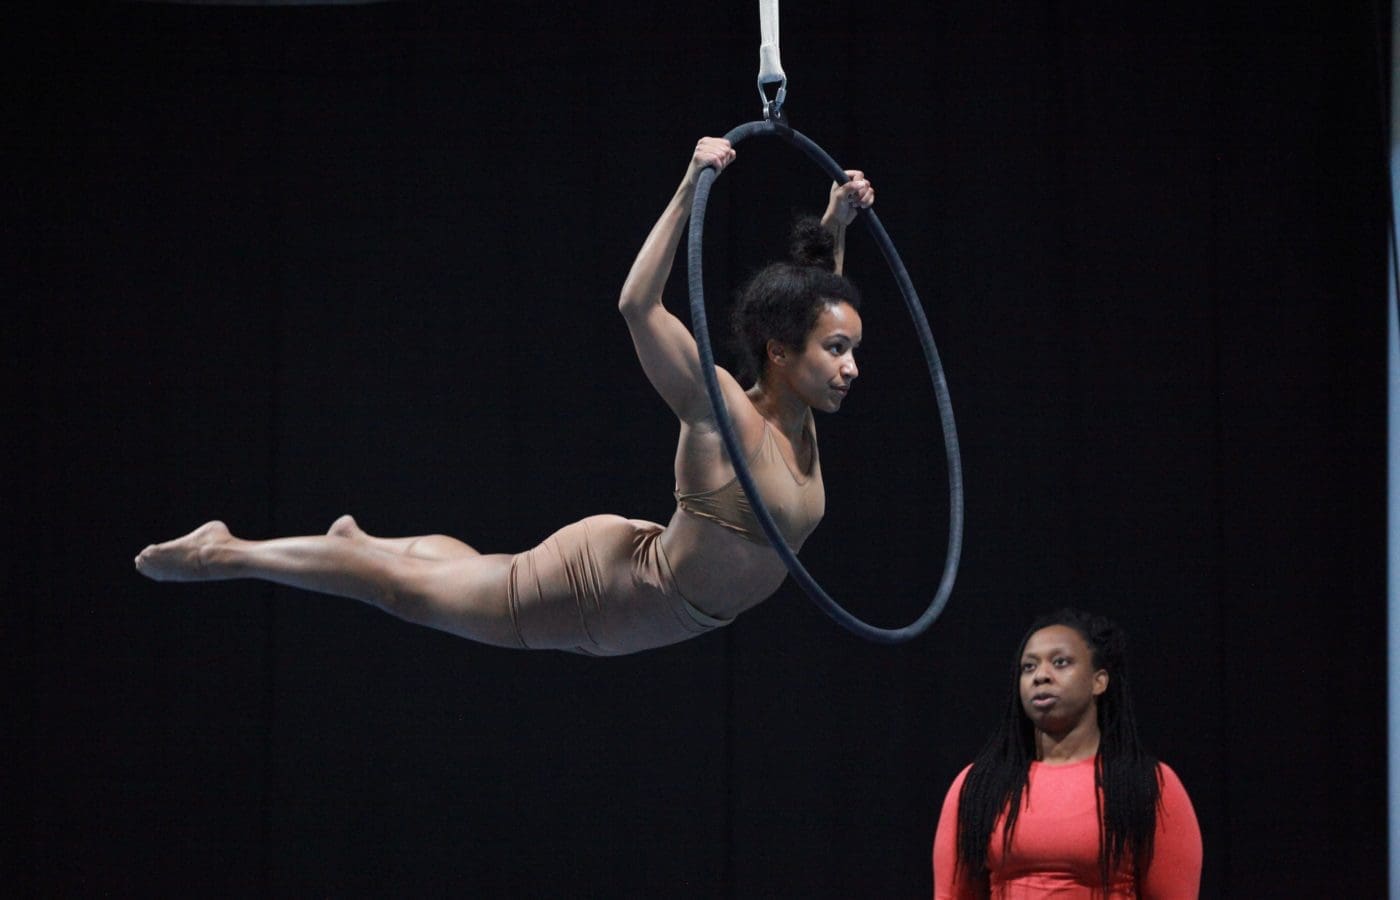 Two women are in a black room. One holds herself up on an aerial hoop while the other stands and watches.